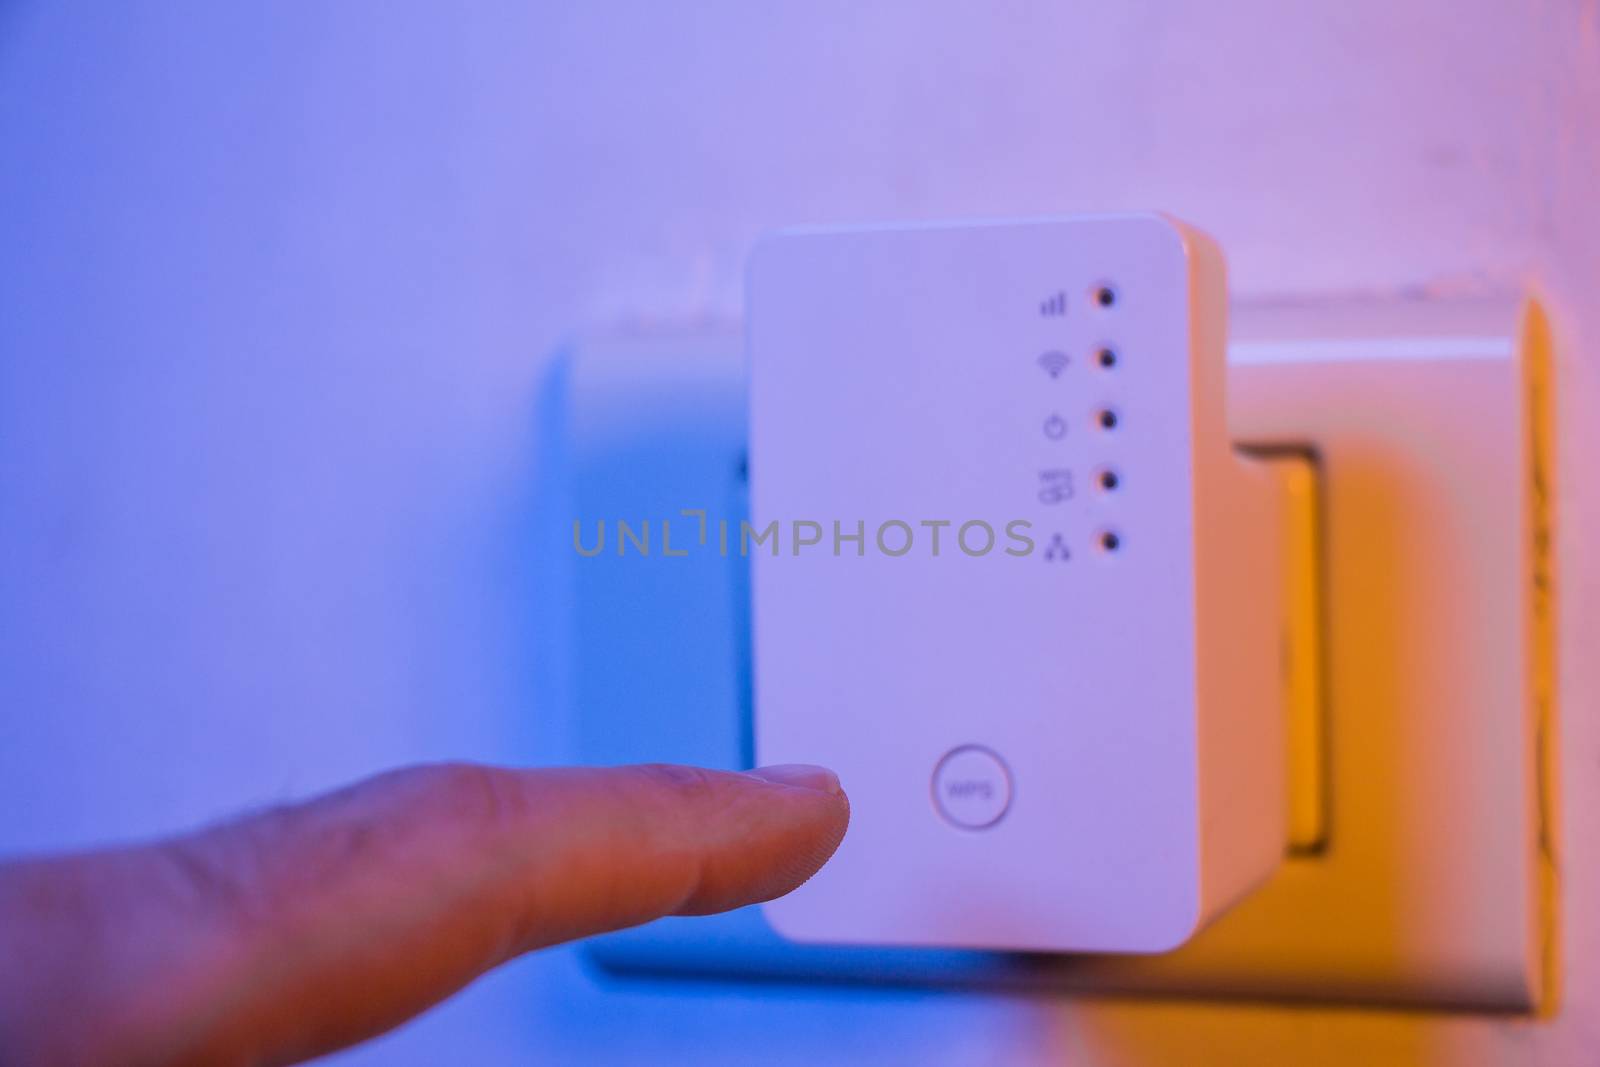 Man press with his finger on WPS button on WiFi repeater which is in electrical socket on the wall. The device help to extend wireless network in home or office.